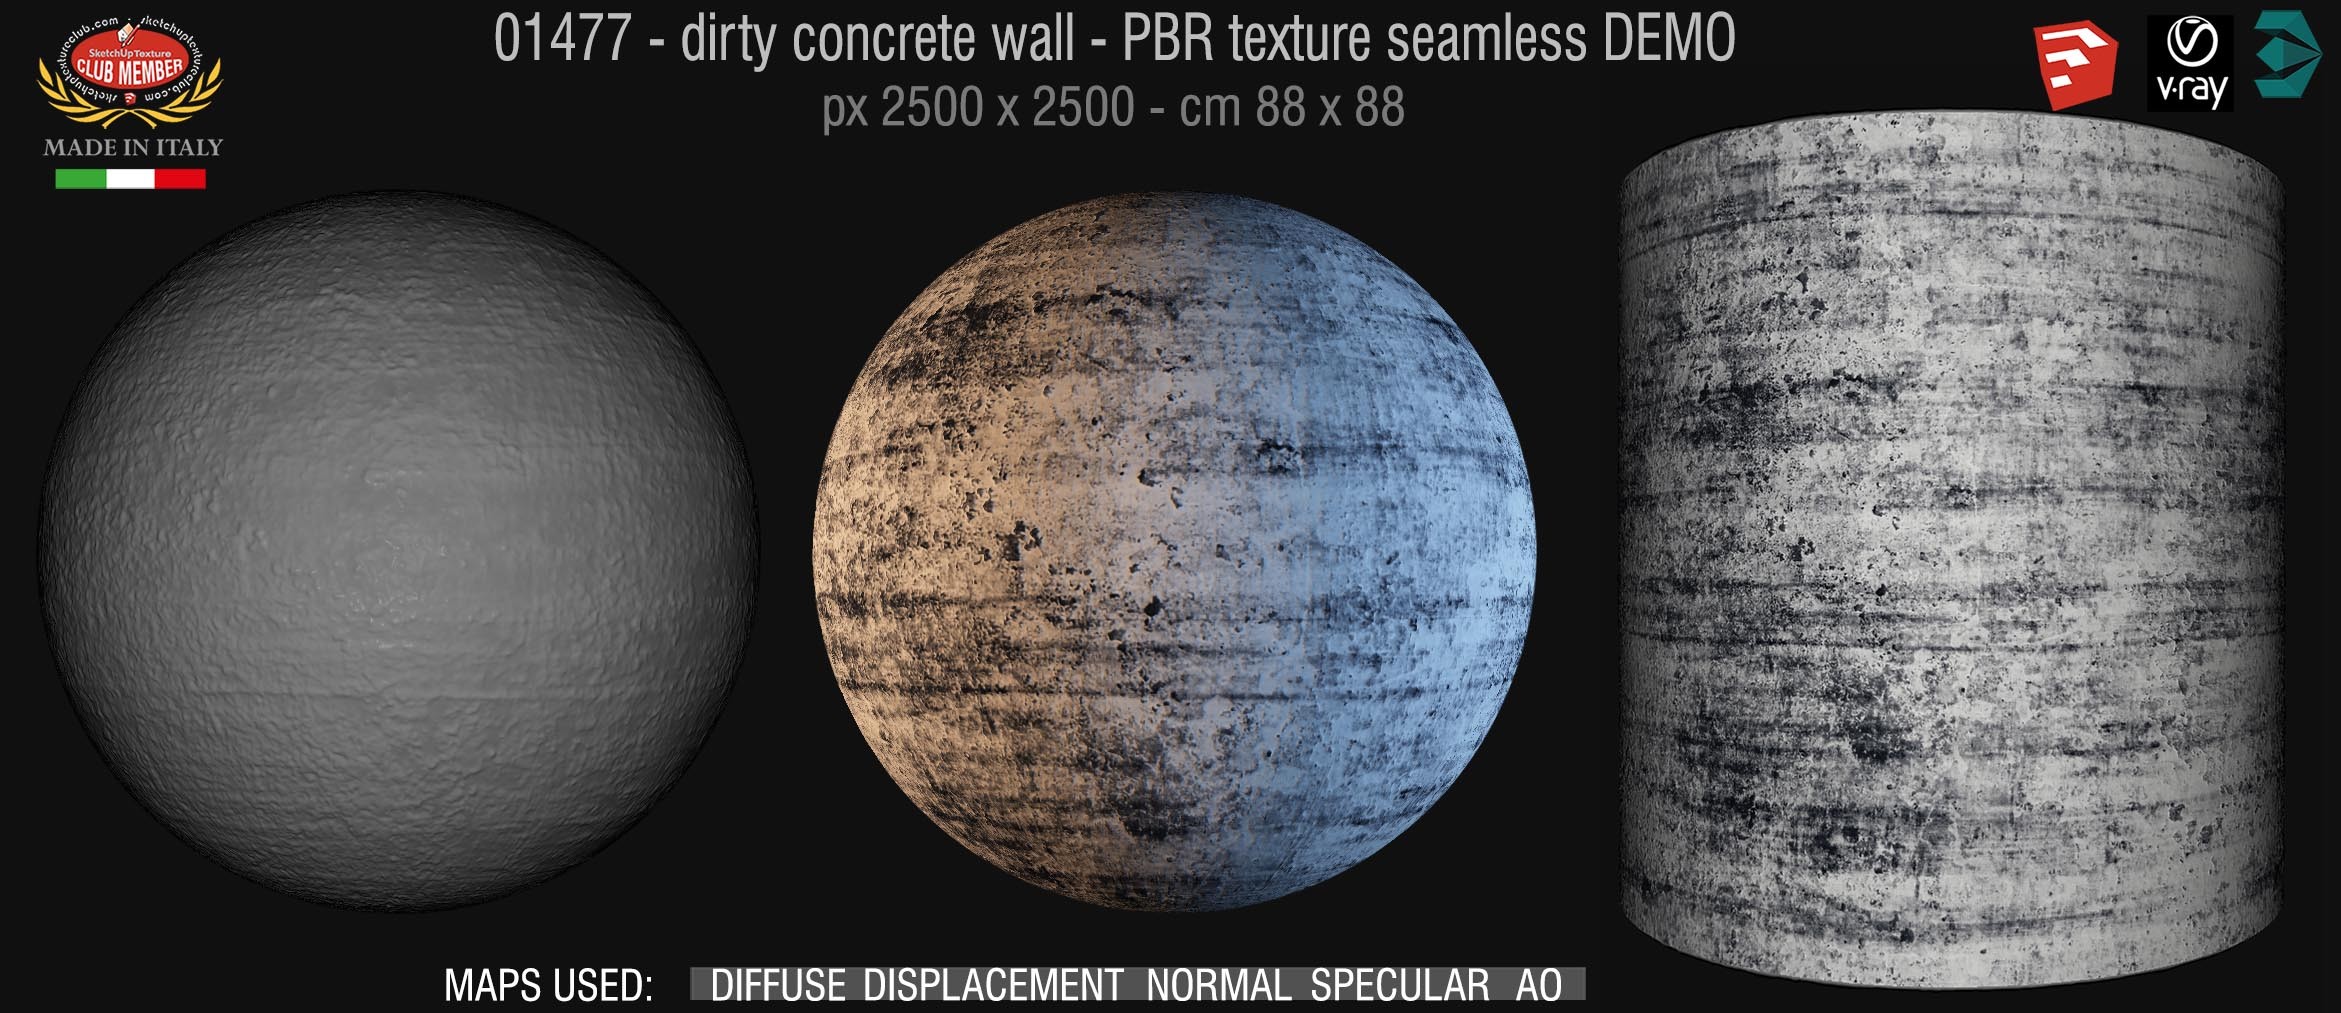 01477 Concrete bare dirty wall PBR texture seamless DEMO